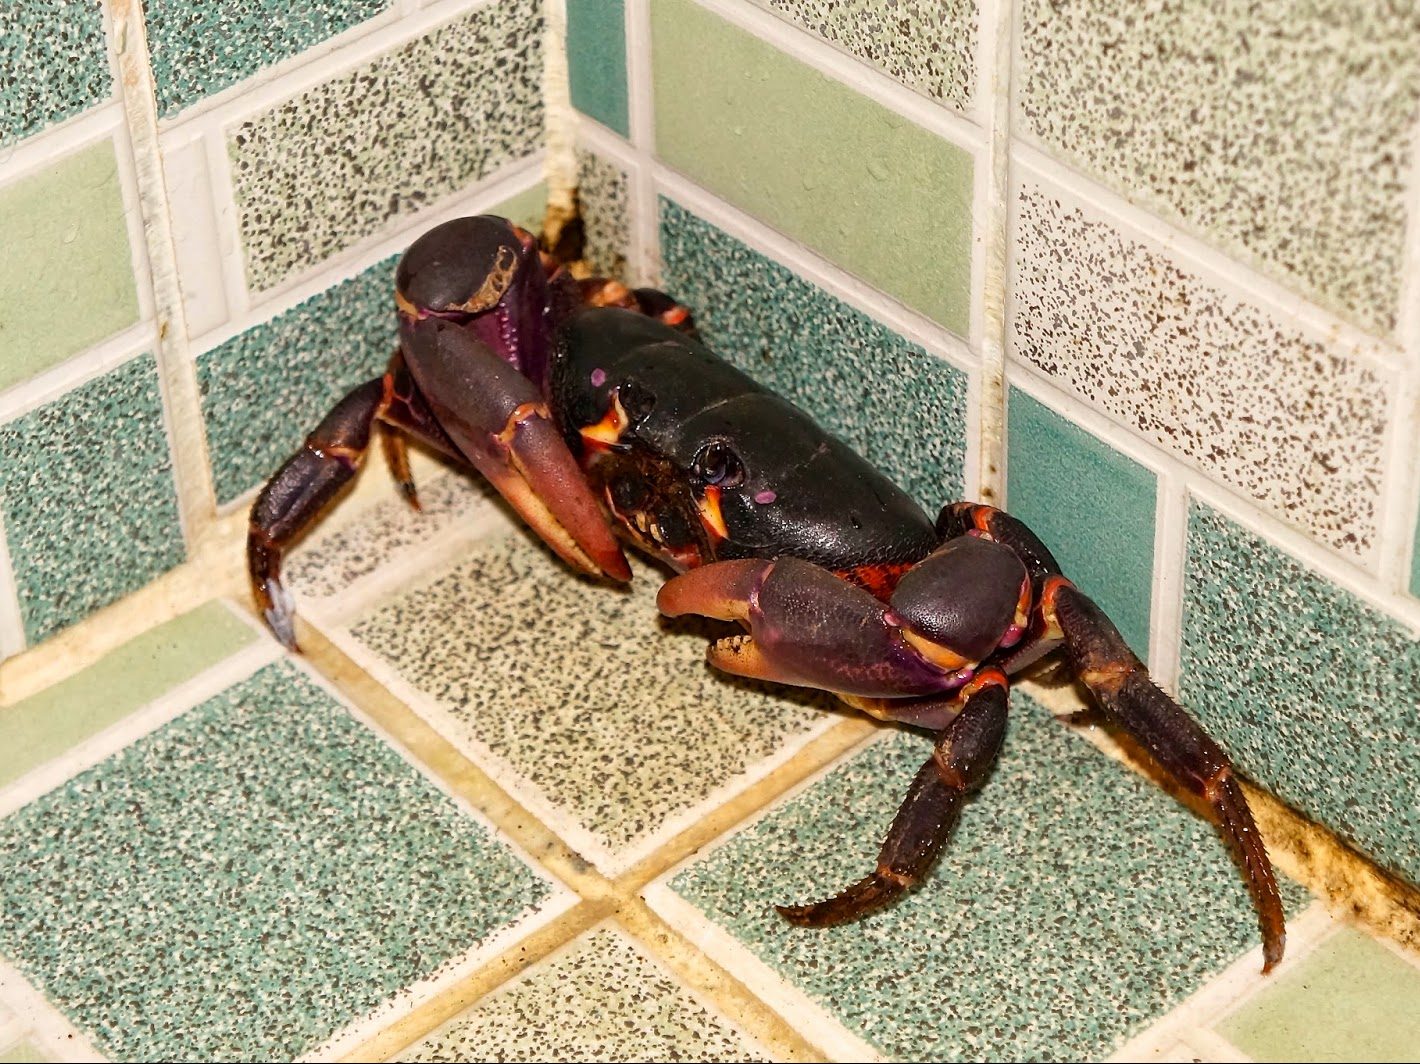 crab in our shower, Palau